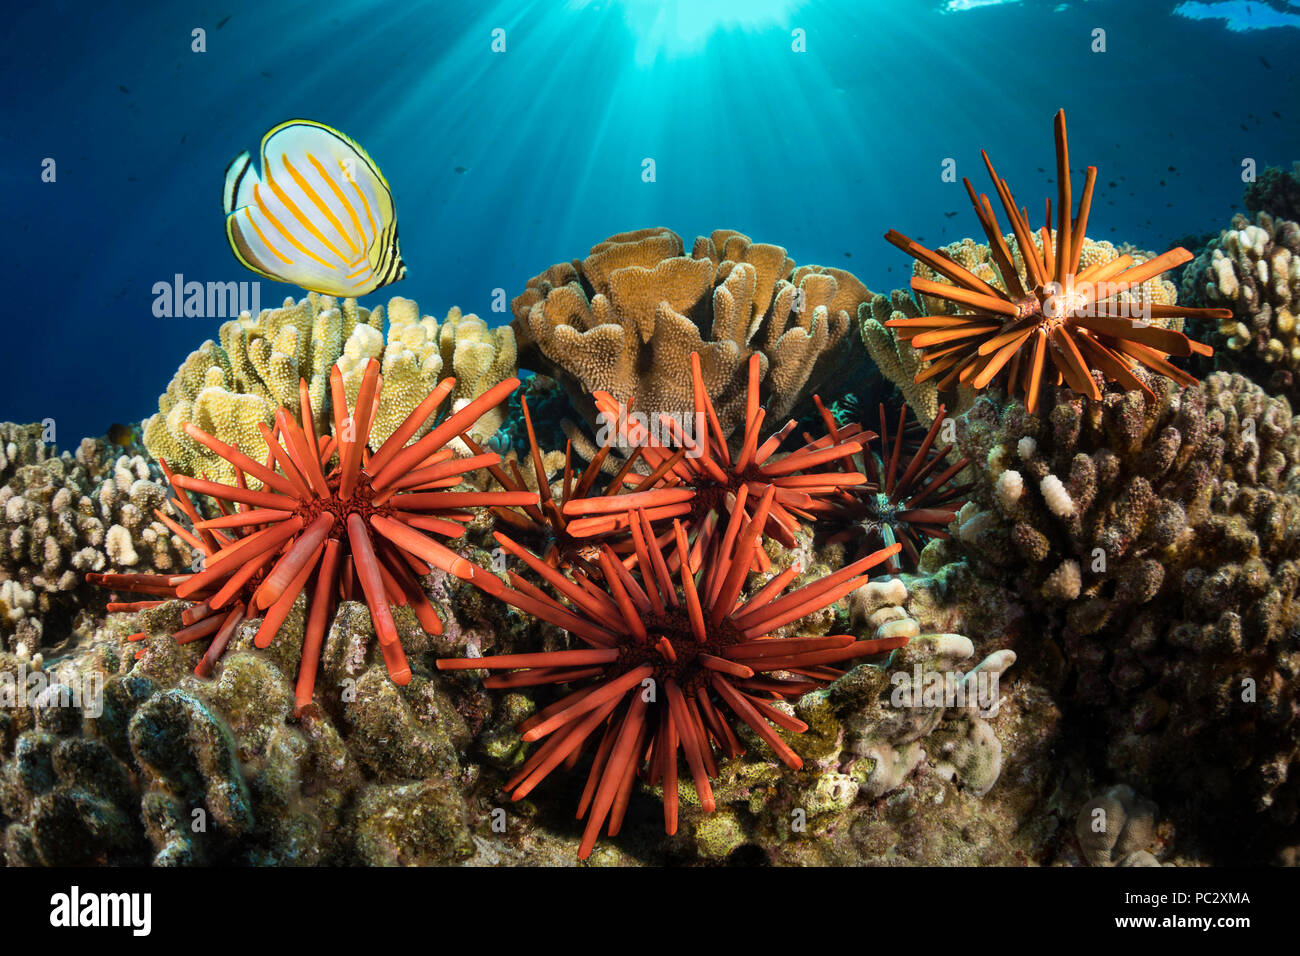 Slate pencil sea urchins, Heterocentrotus mammillatus, color the foreground of this Hawaiian reef scene with one ornate butterflyfish, Chaetodon ornat Stock Photo